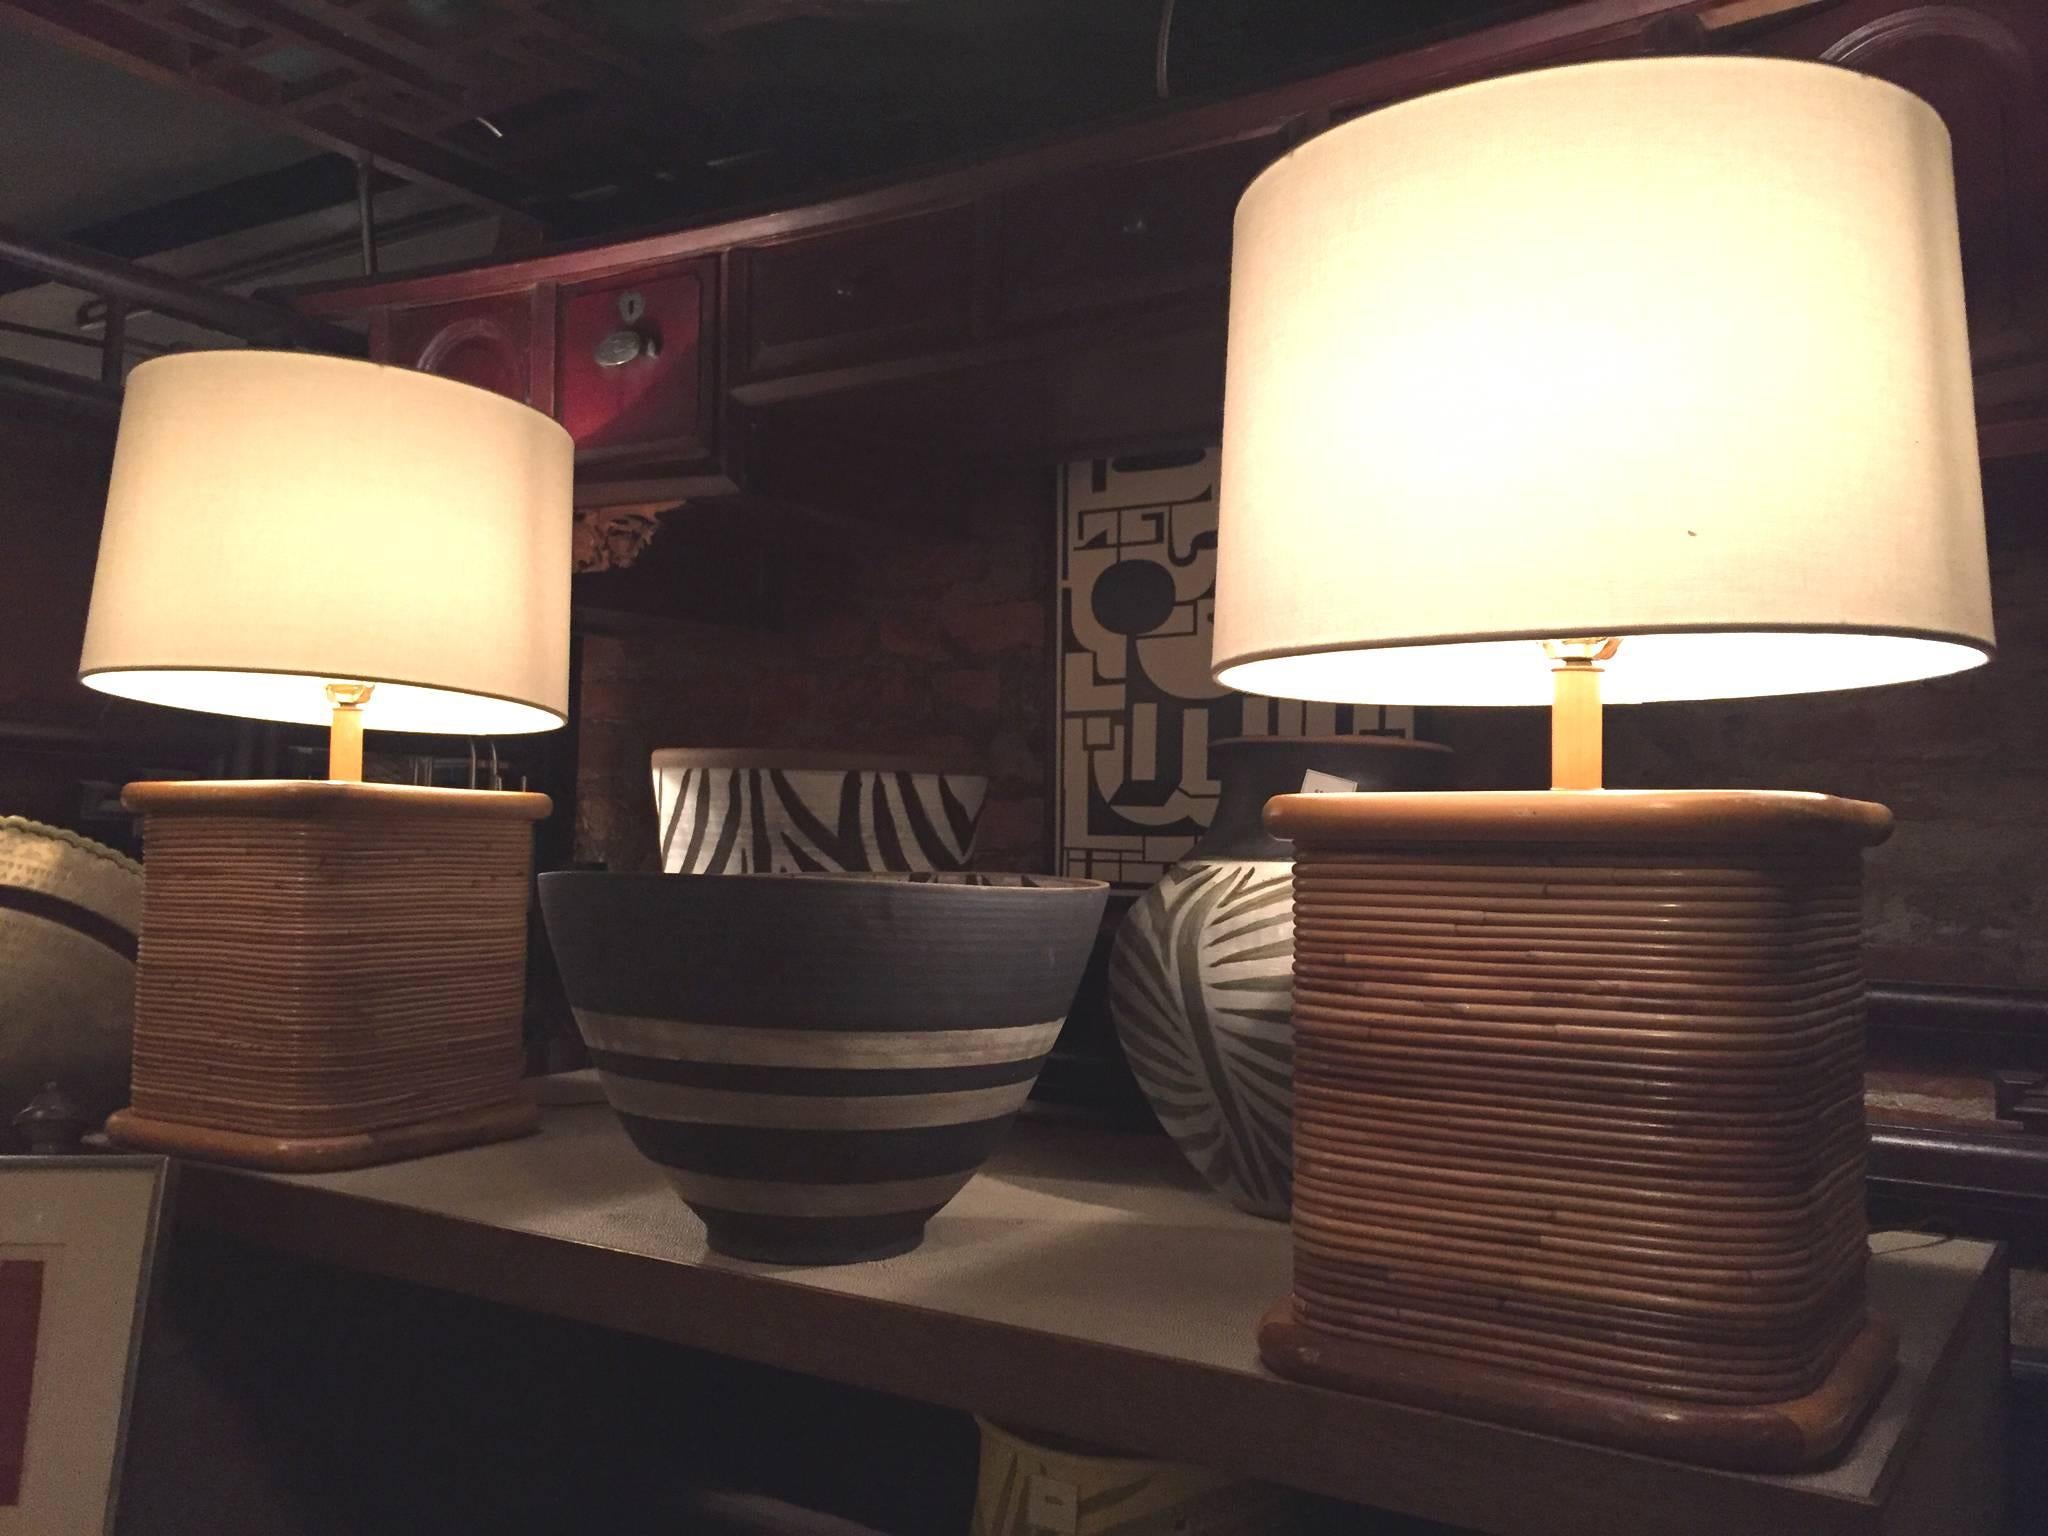 These mid-20th century rattan cube lamps are in the eclectic style of designer Paul Frankl, who was renowned for his rattan furniture. Like those Frankl chairs and sofas, these lamps have an organic look with smooth lines and soft edges. The lamps